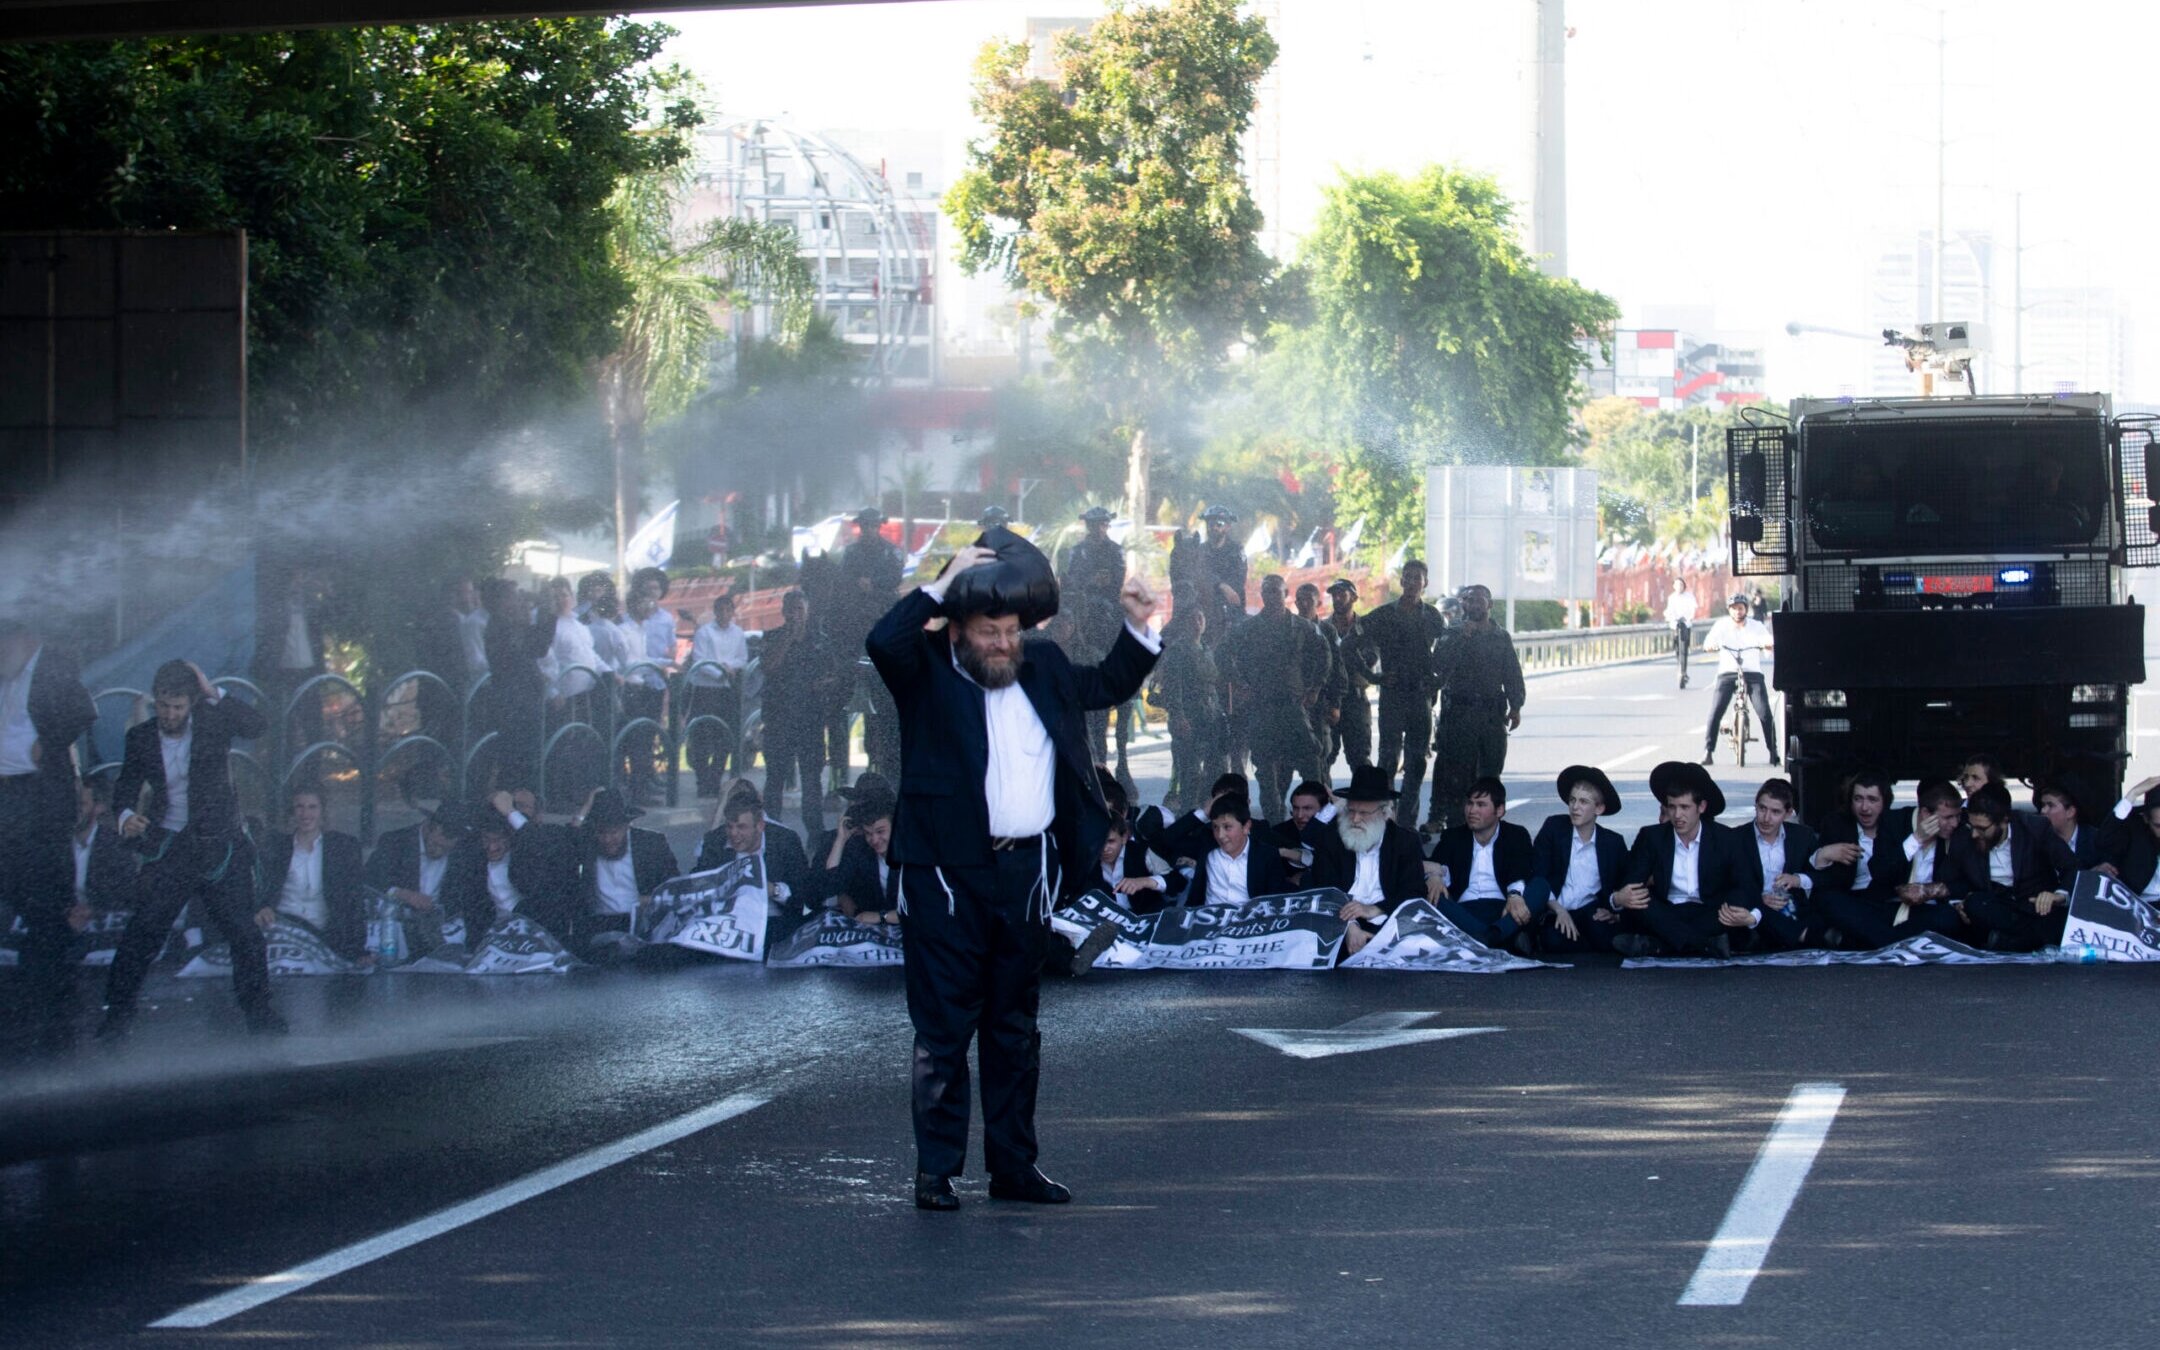 Police officers use water cannons as haredi Orthodox Jewish men block a main highway during a protest against drafting into the Israeli army on June 2, 2024 in Bnei Brak, Israel. (Amir Levy/Getty Images)